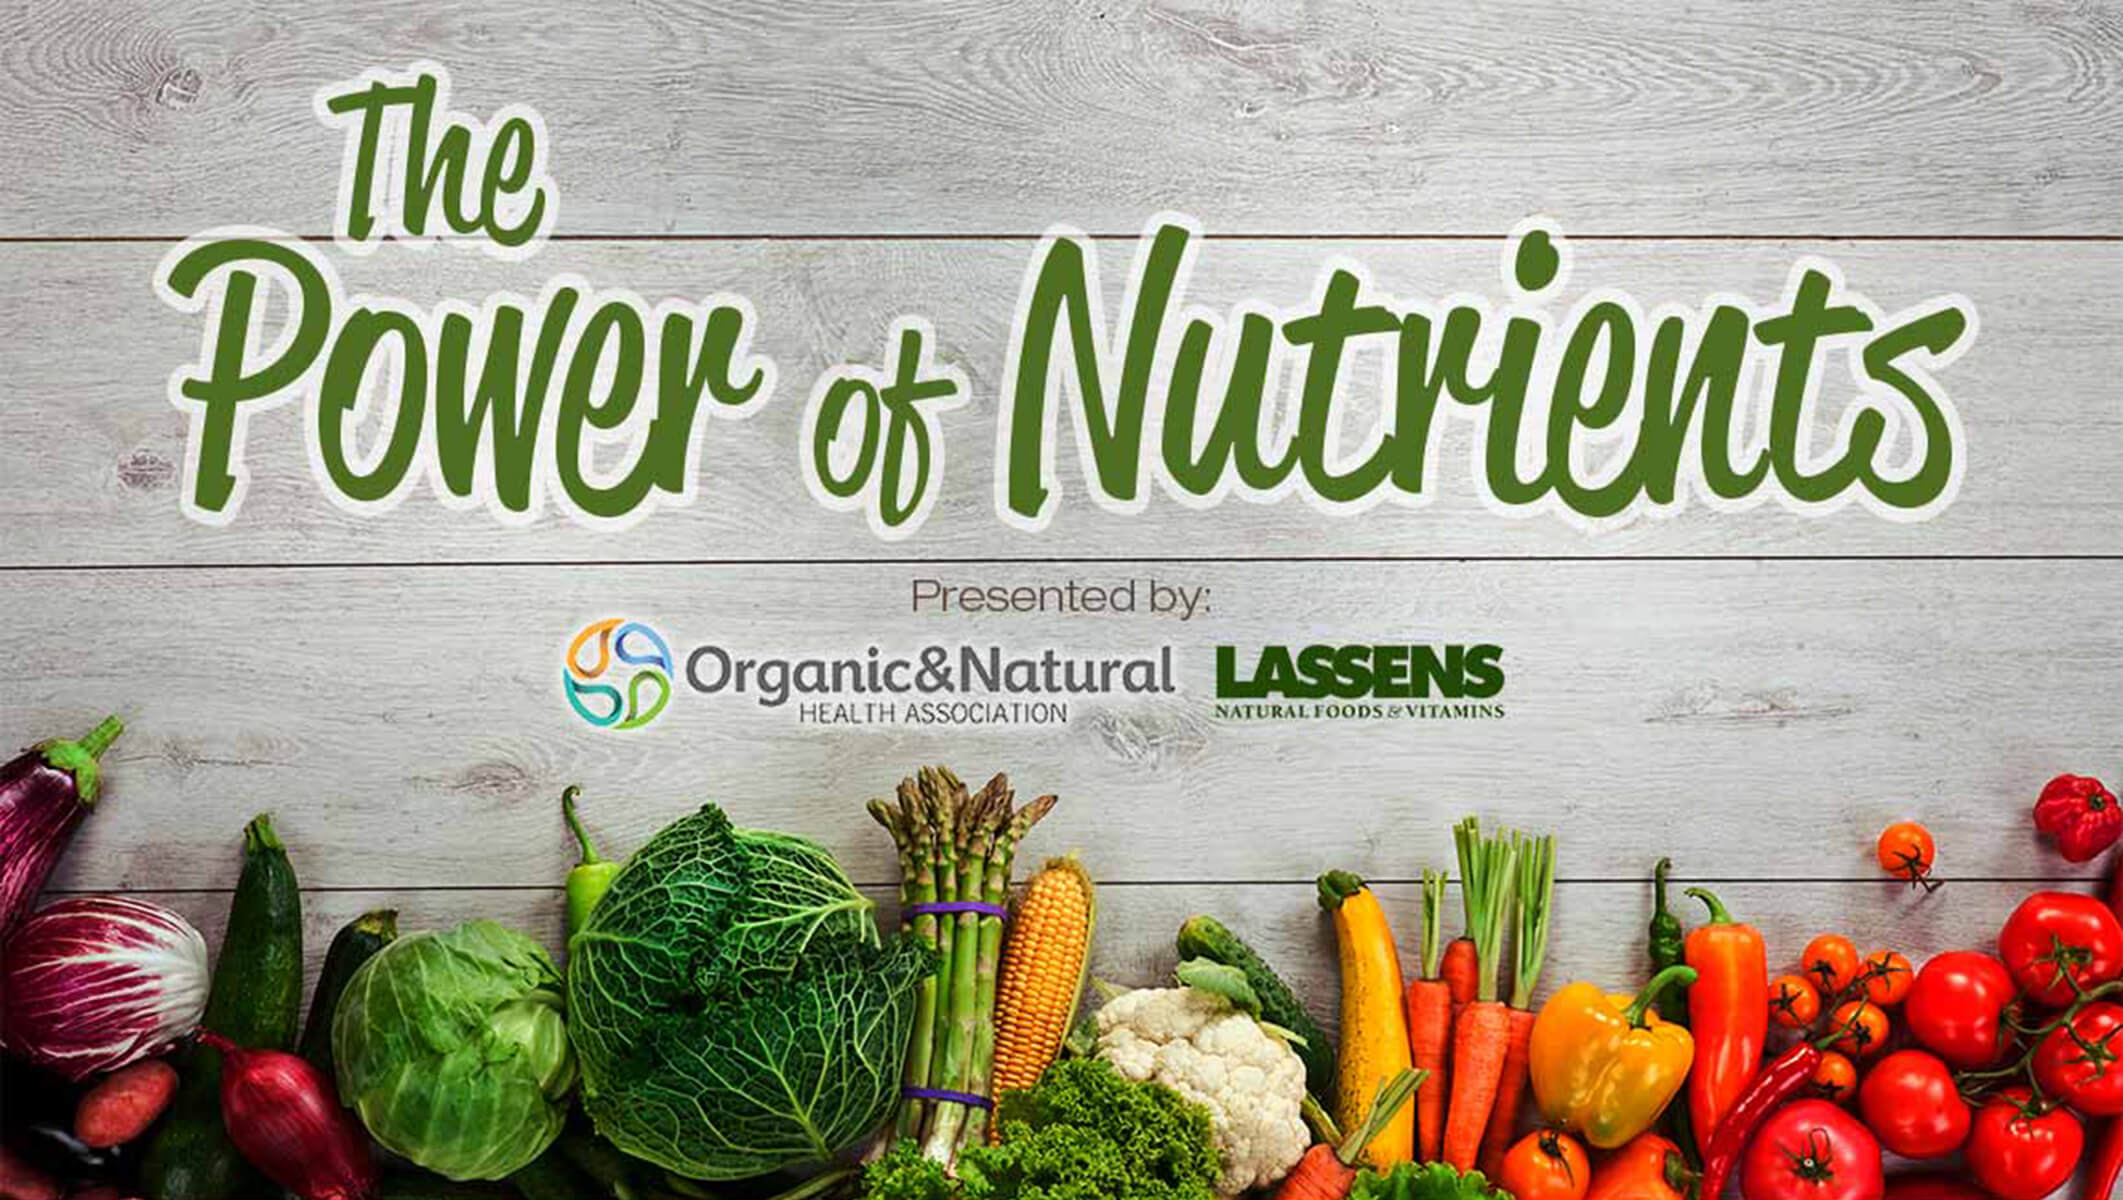 The Power of Nutrients